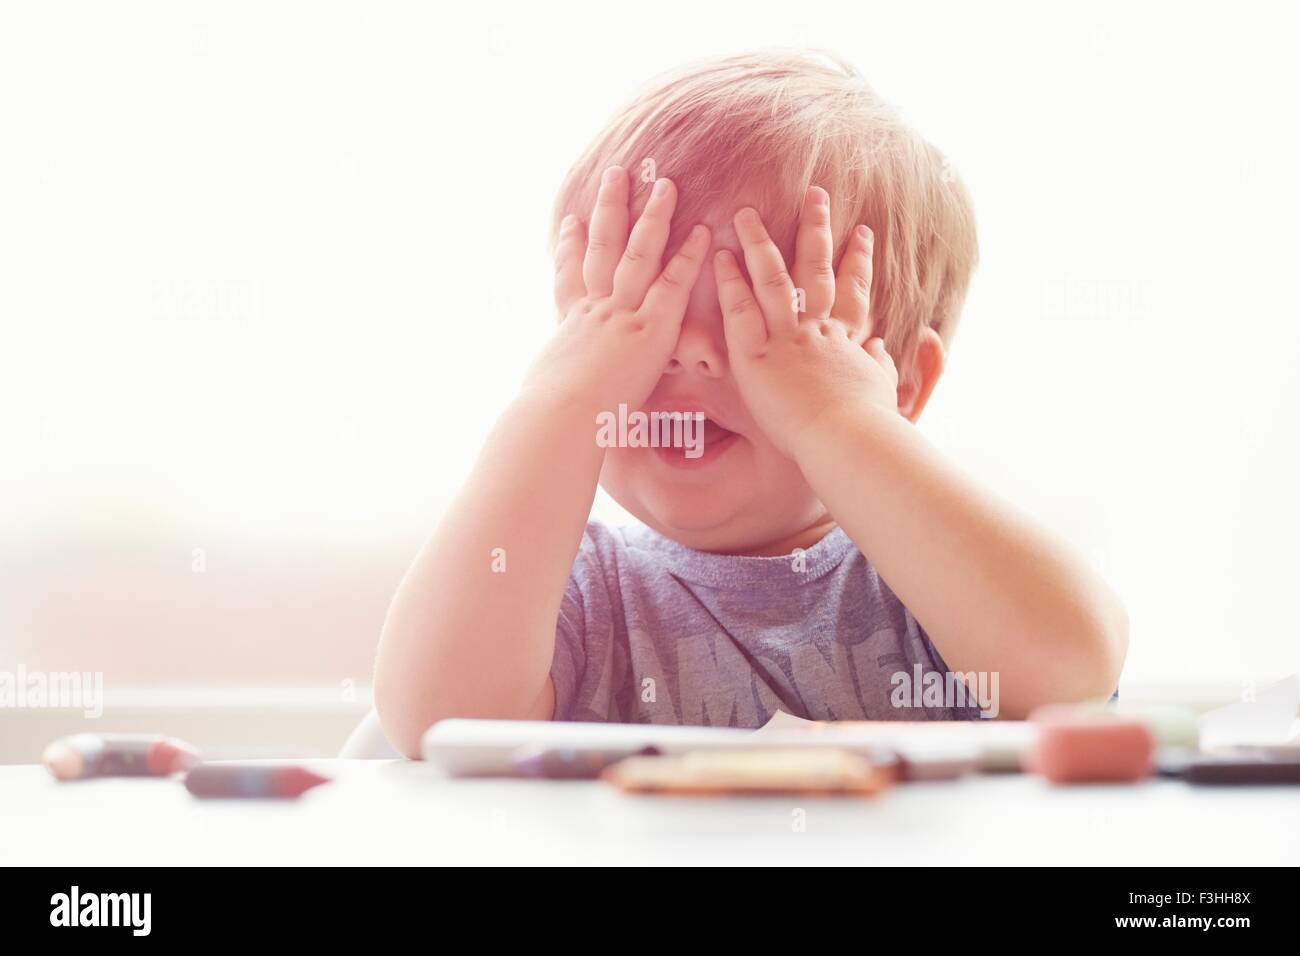 Boy sitting at table resting on elbows, mouth open, covering eyes with hands Stock Photo